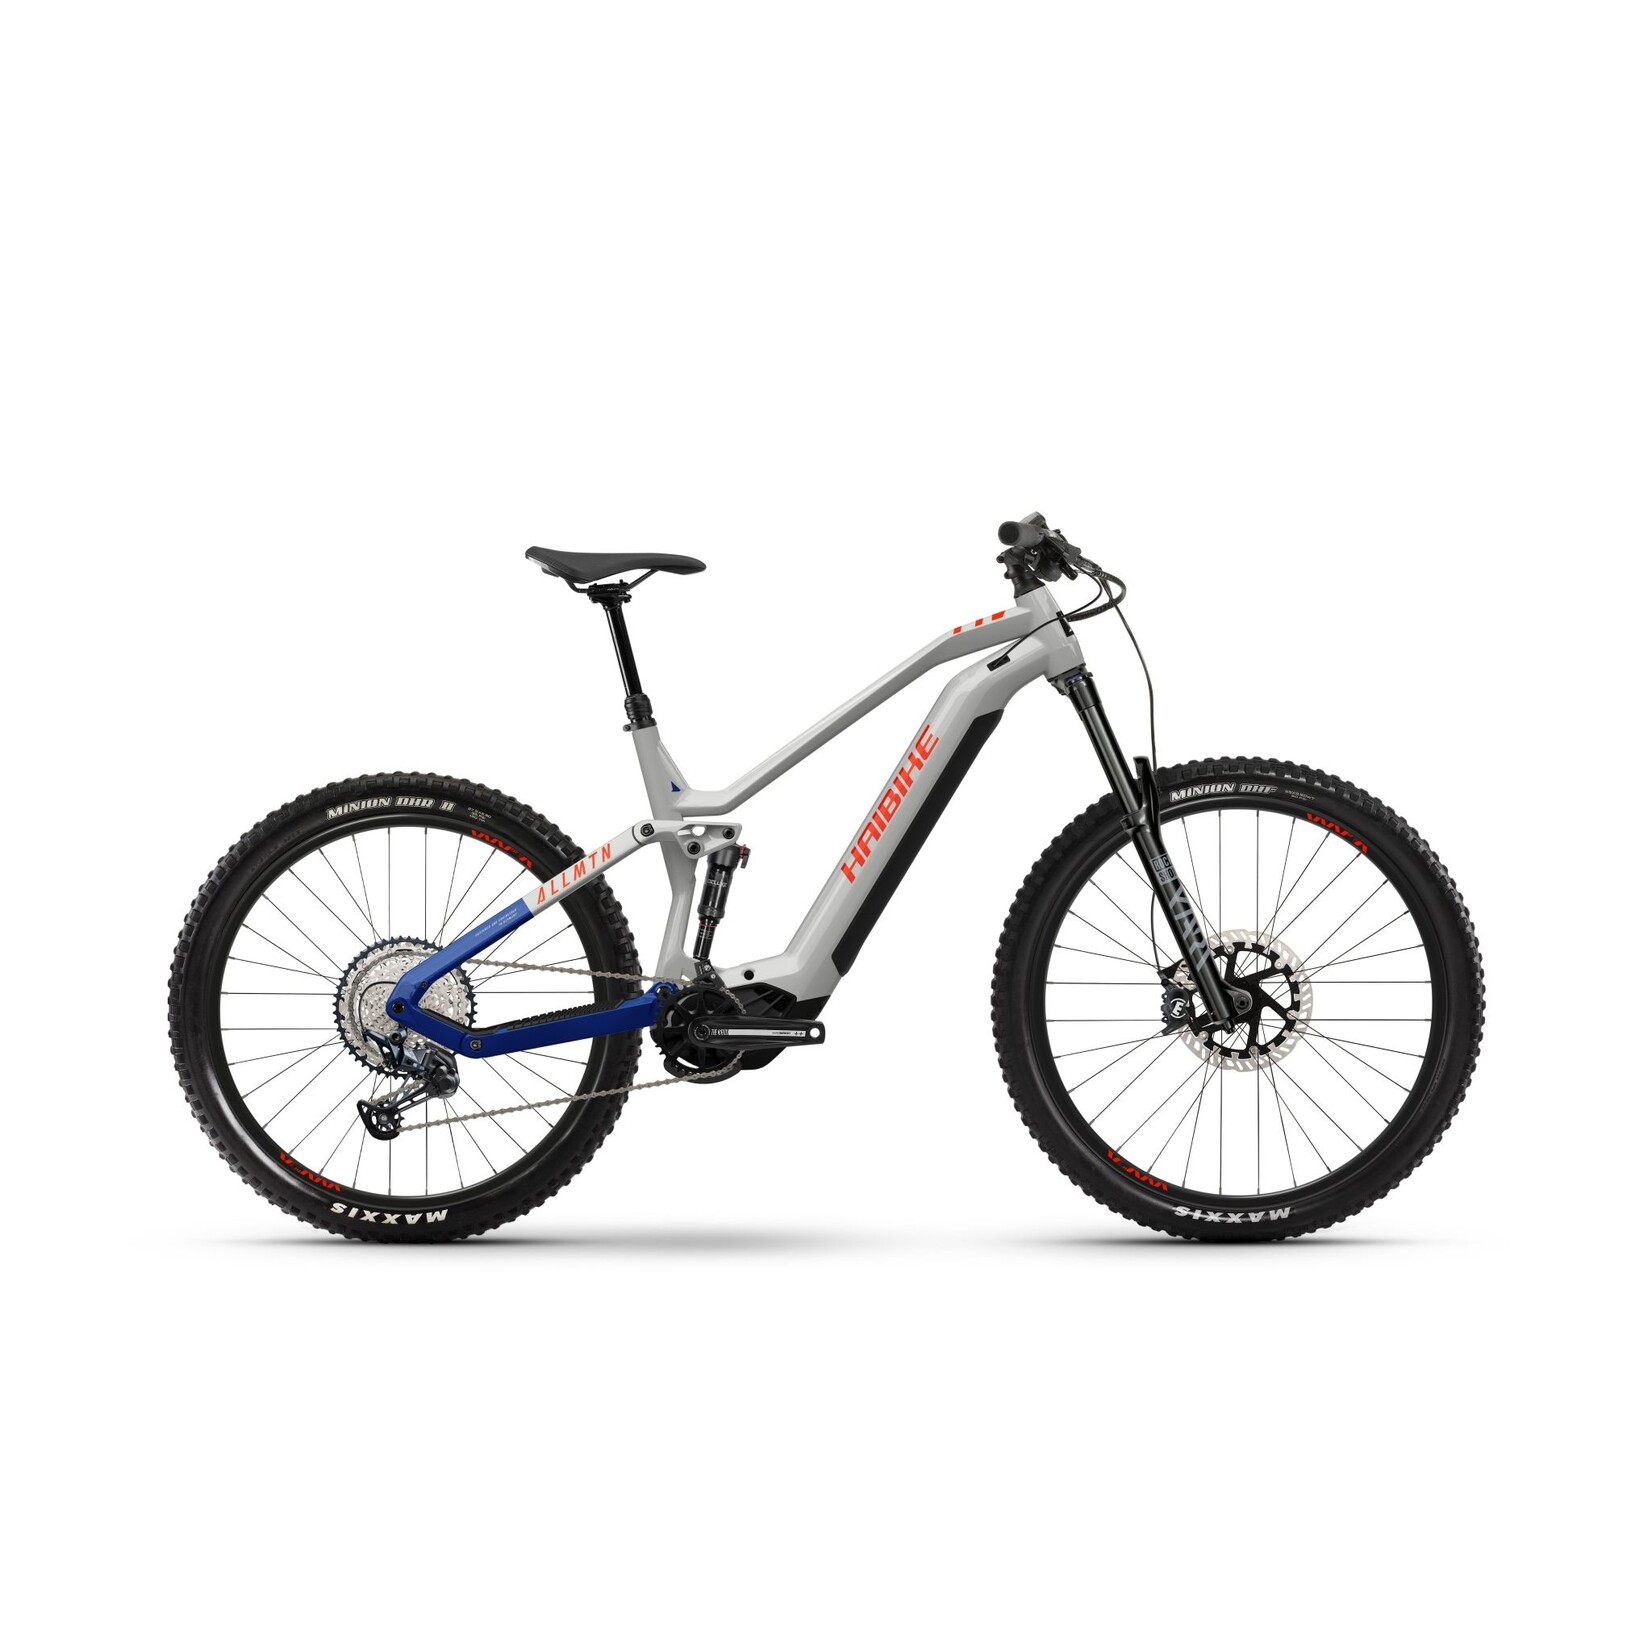 Haibike HAIBIKE ALLMTN 7 eMTB 720Wh Grey/Blue/Red Size Large